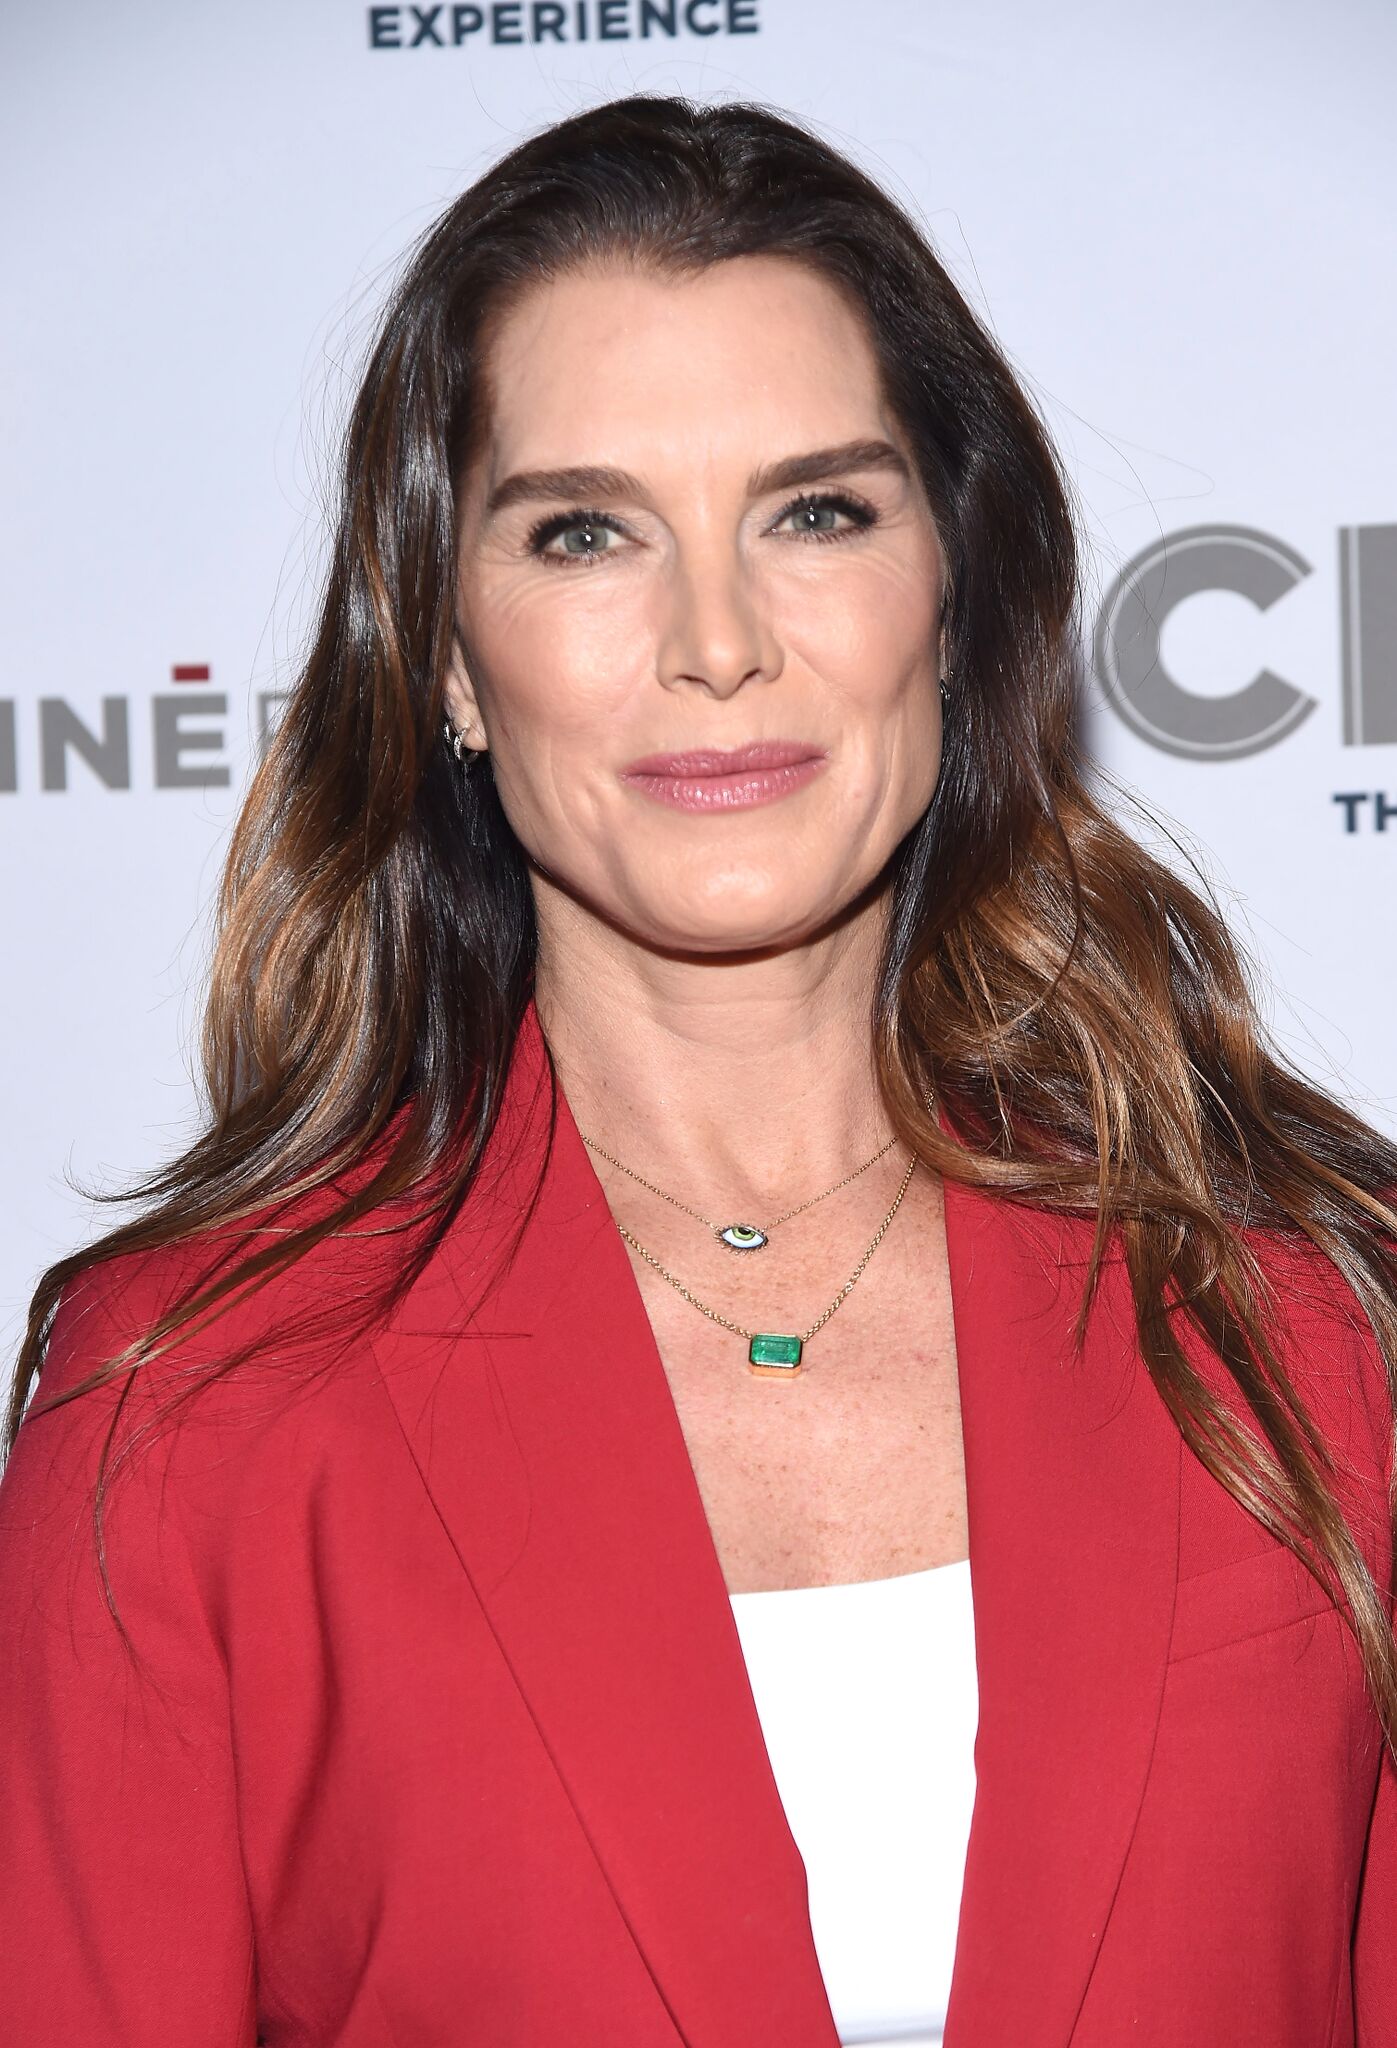 Brooke Shields attends the opening of CMX CineBistro with special screenings of 'Blackkklansman', 'City Lights' and 'Pretty Baby' at CMX CineBistro | Getty Images